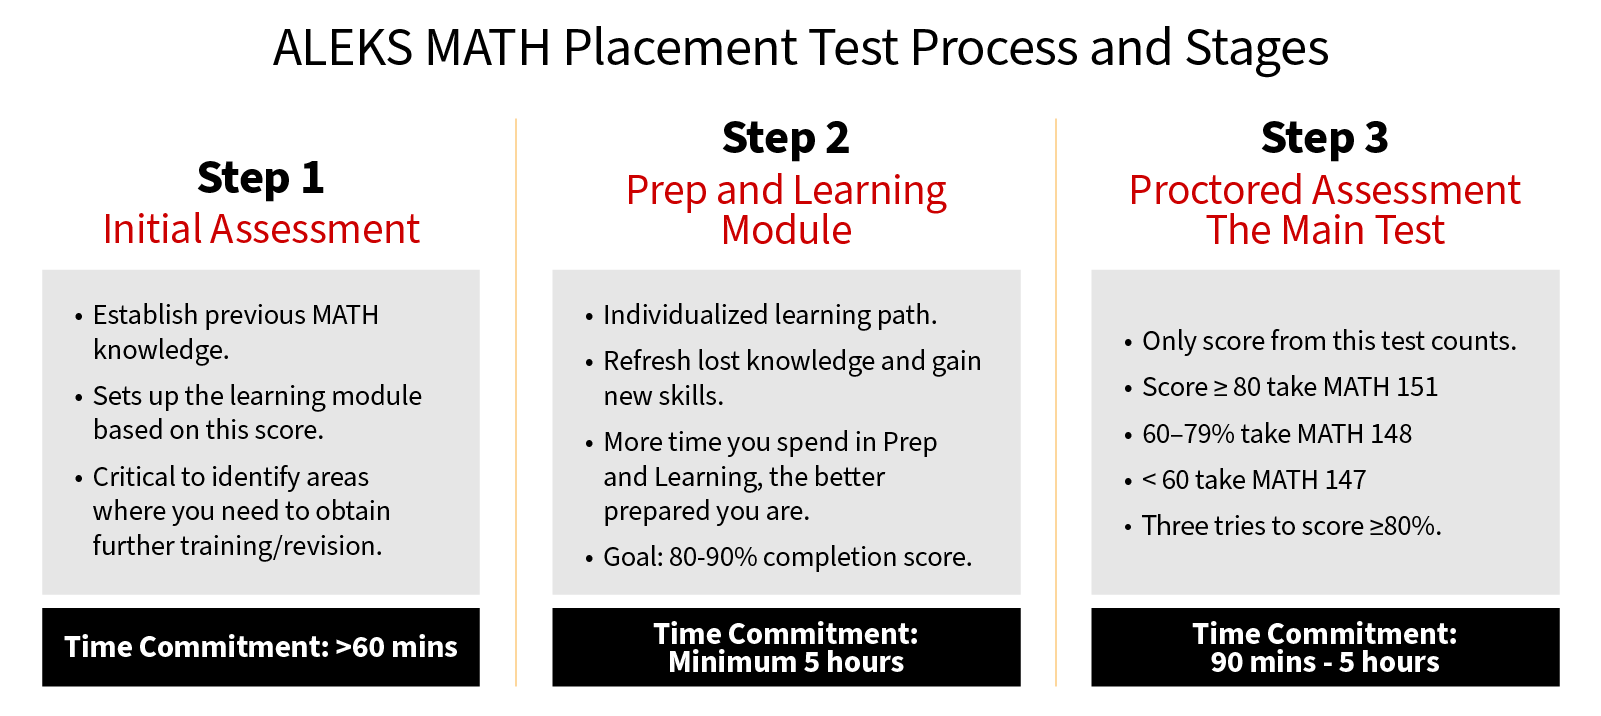 ALEKS Math Placement Test Process and Stages